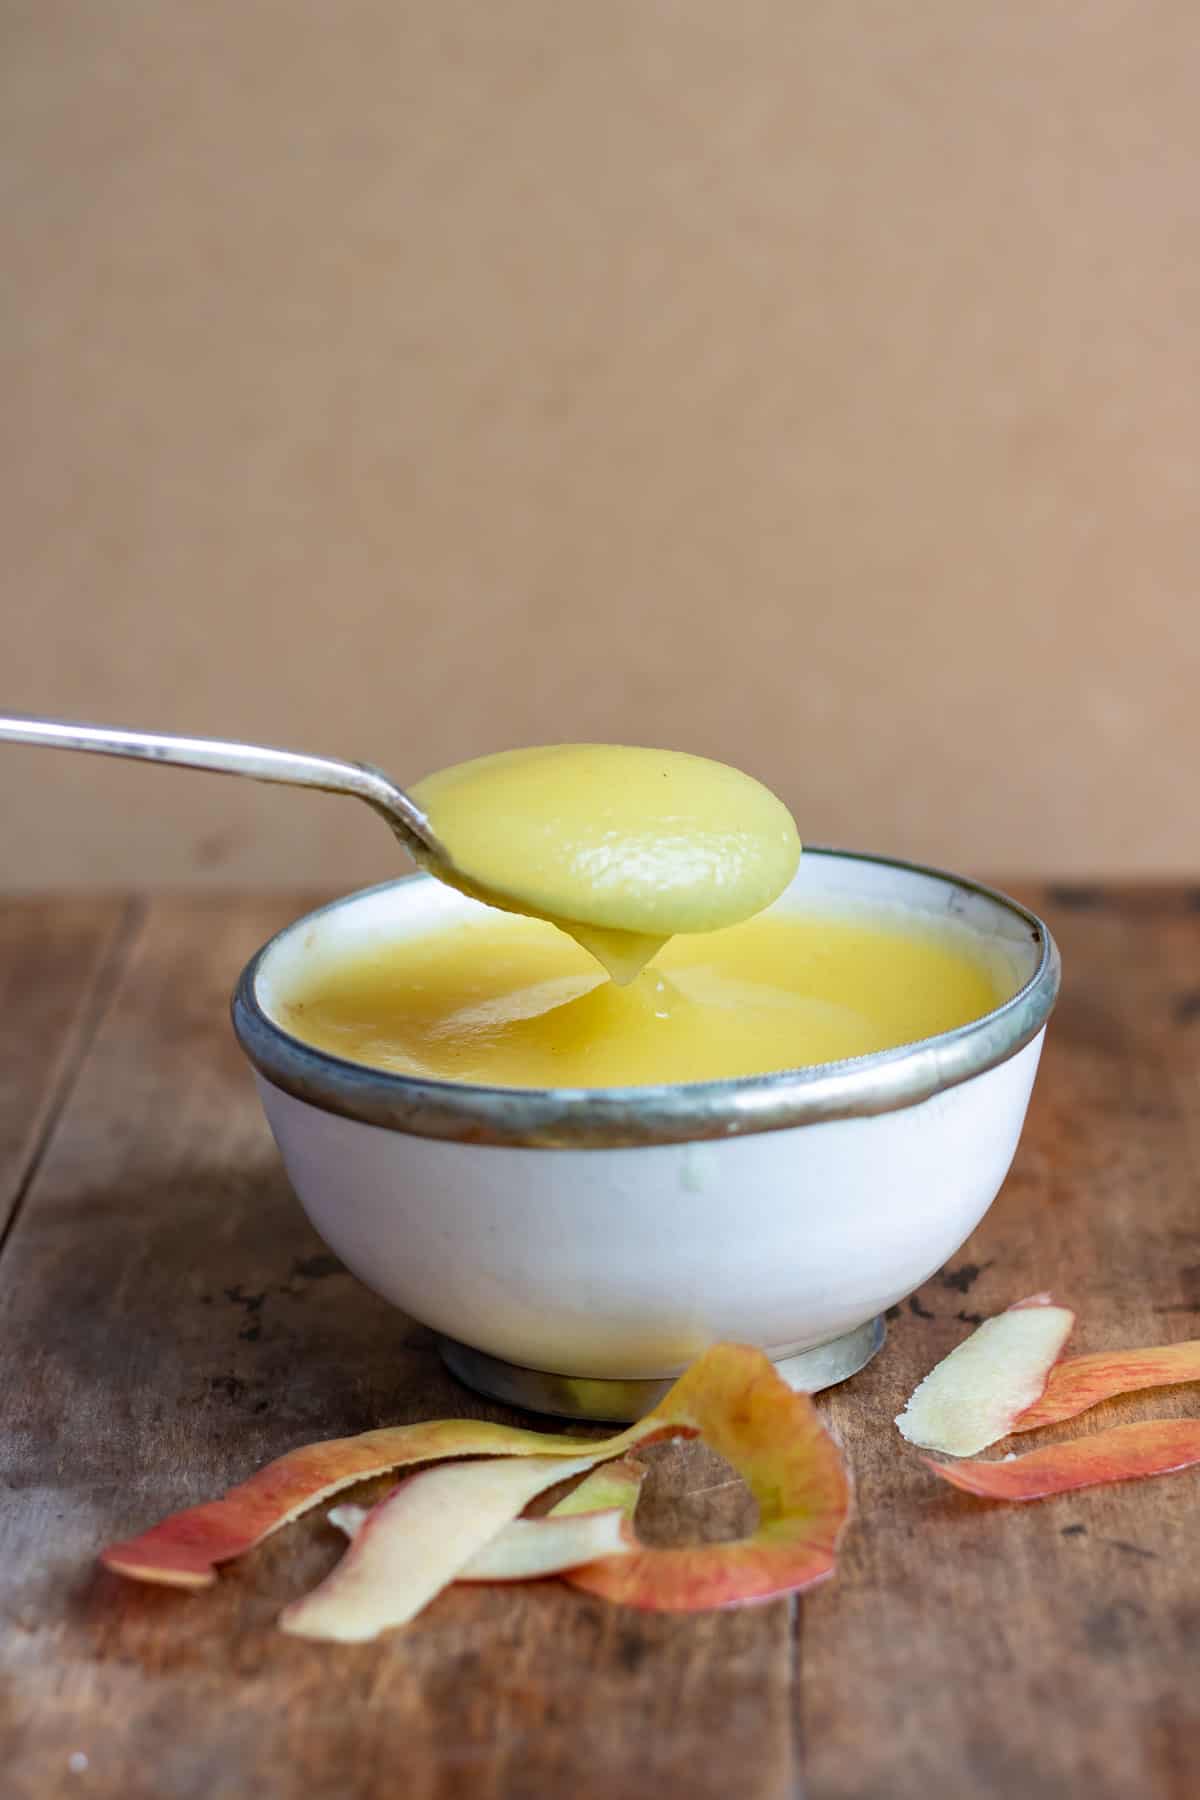 A spoonful coming out of a bowl of applesauce.